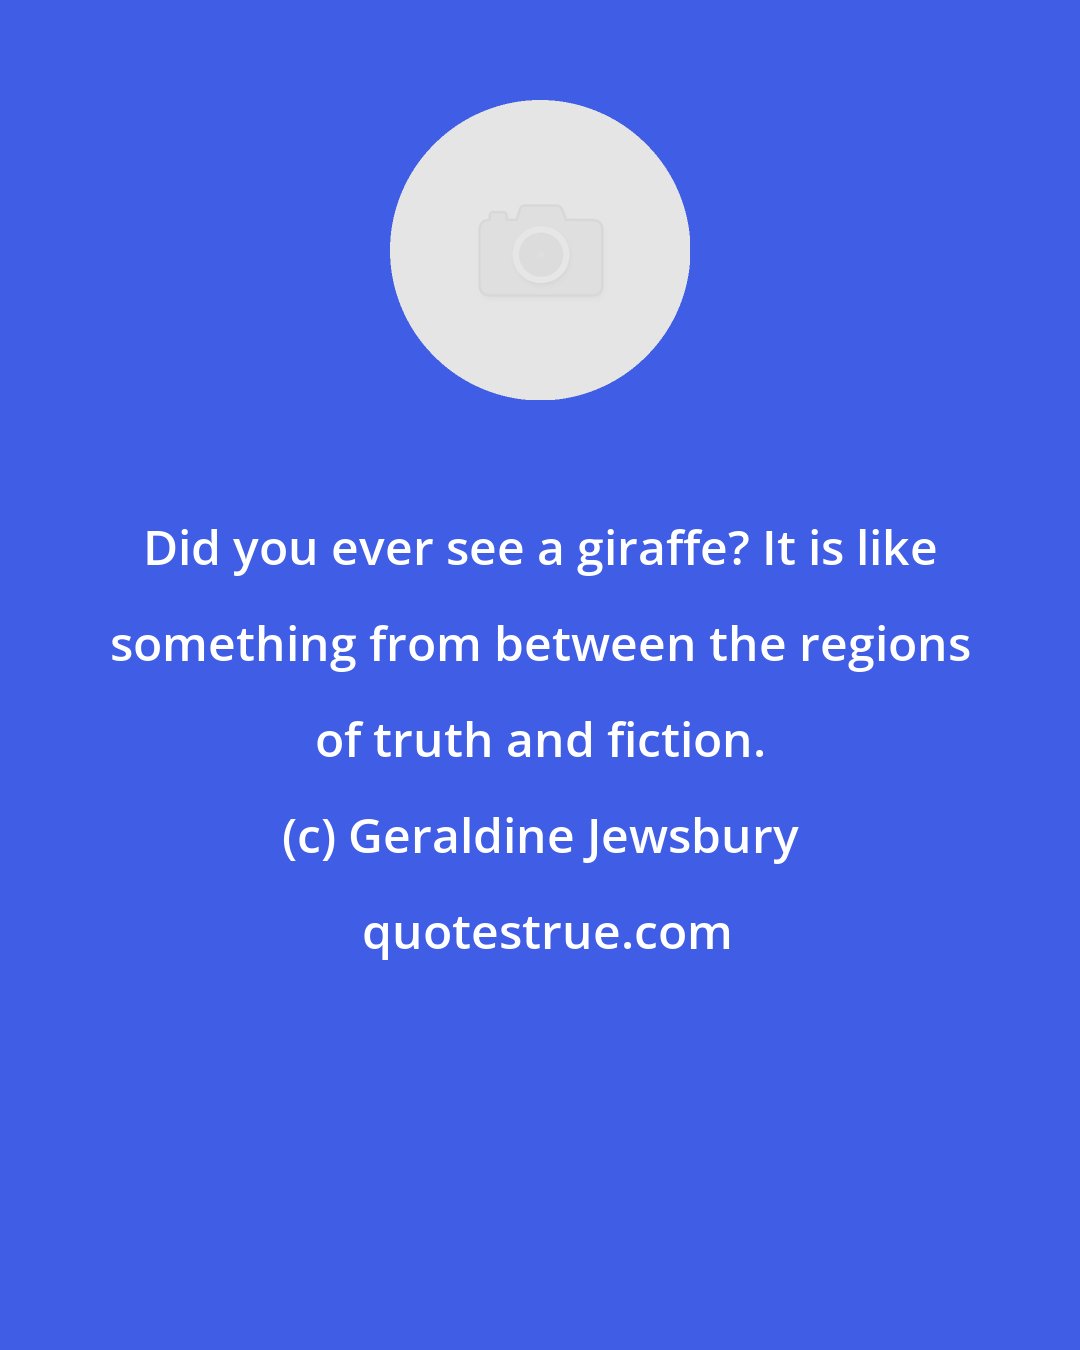 Geraldine Jewsbury: Did you ever see a giraffe? It is like something from between the regions of truth and fiction.